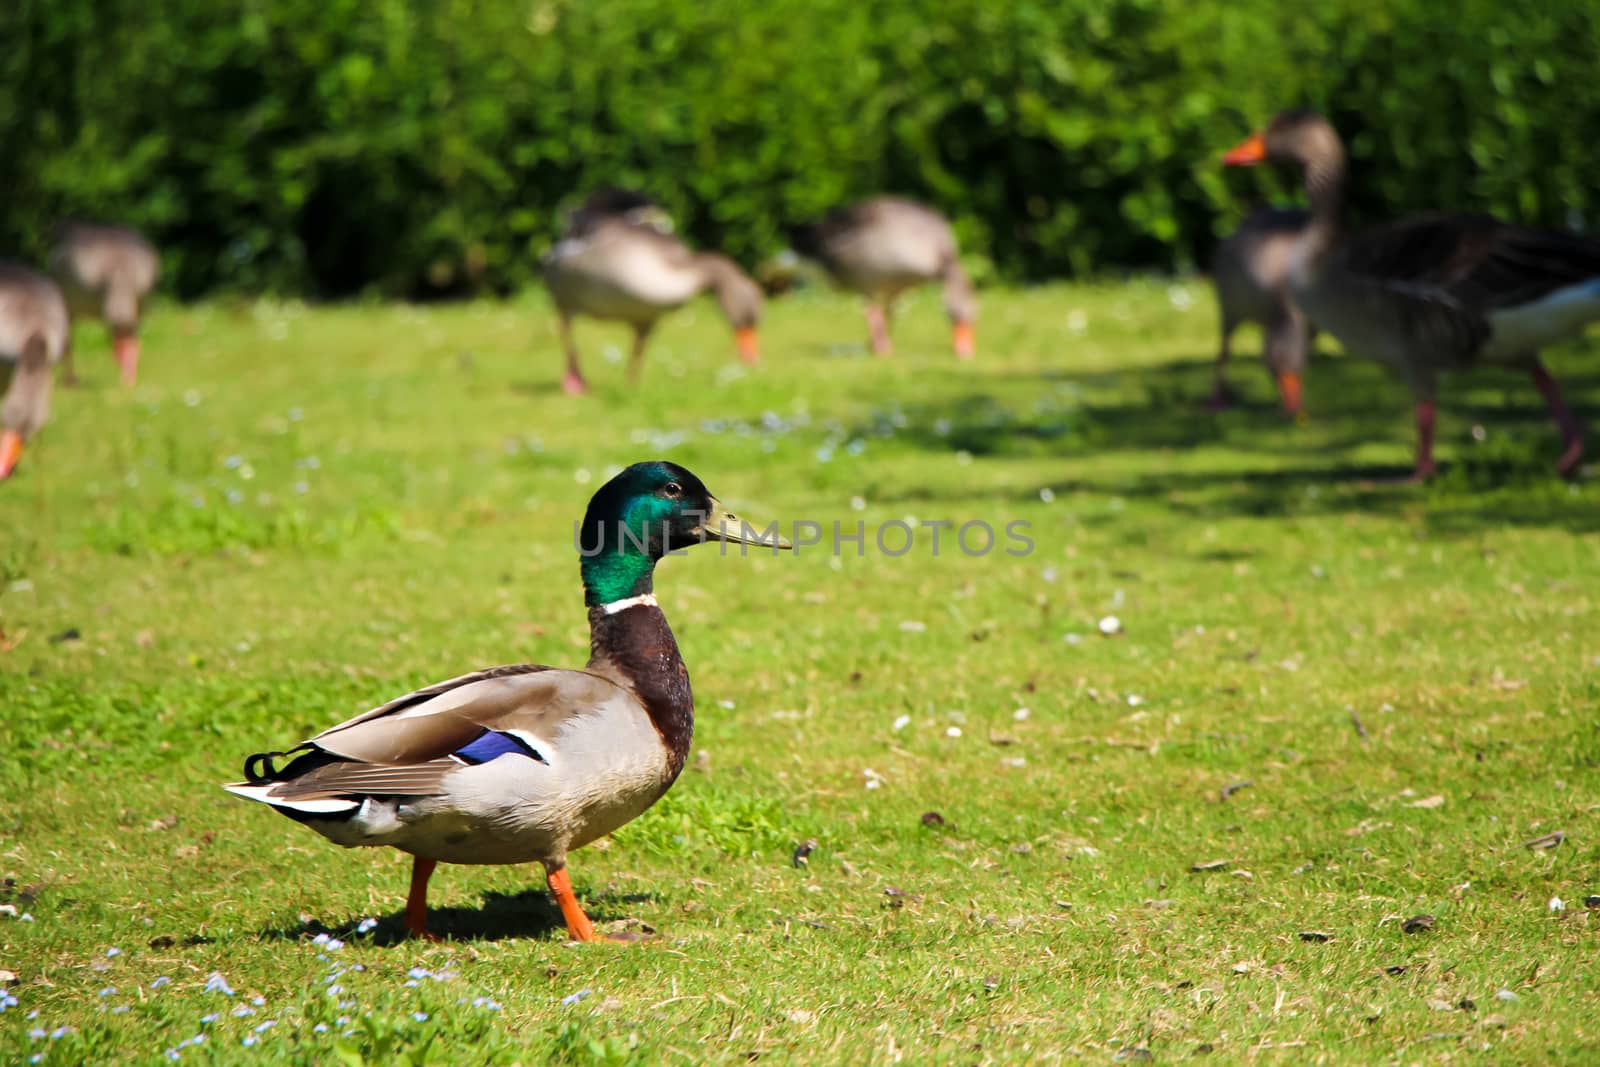 Male duck and geese standing on grass in park surrounded by trees.